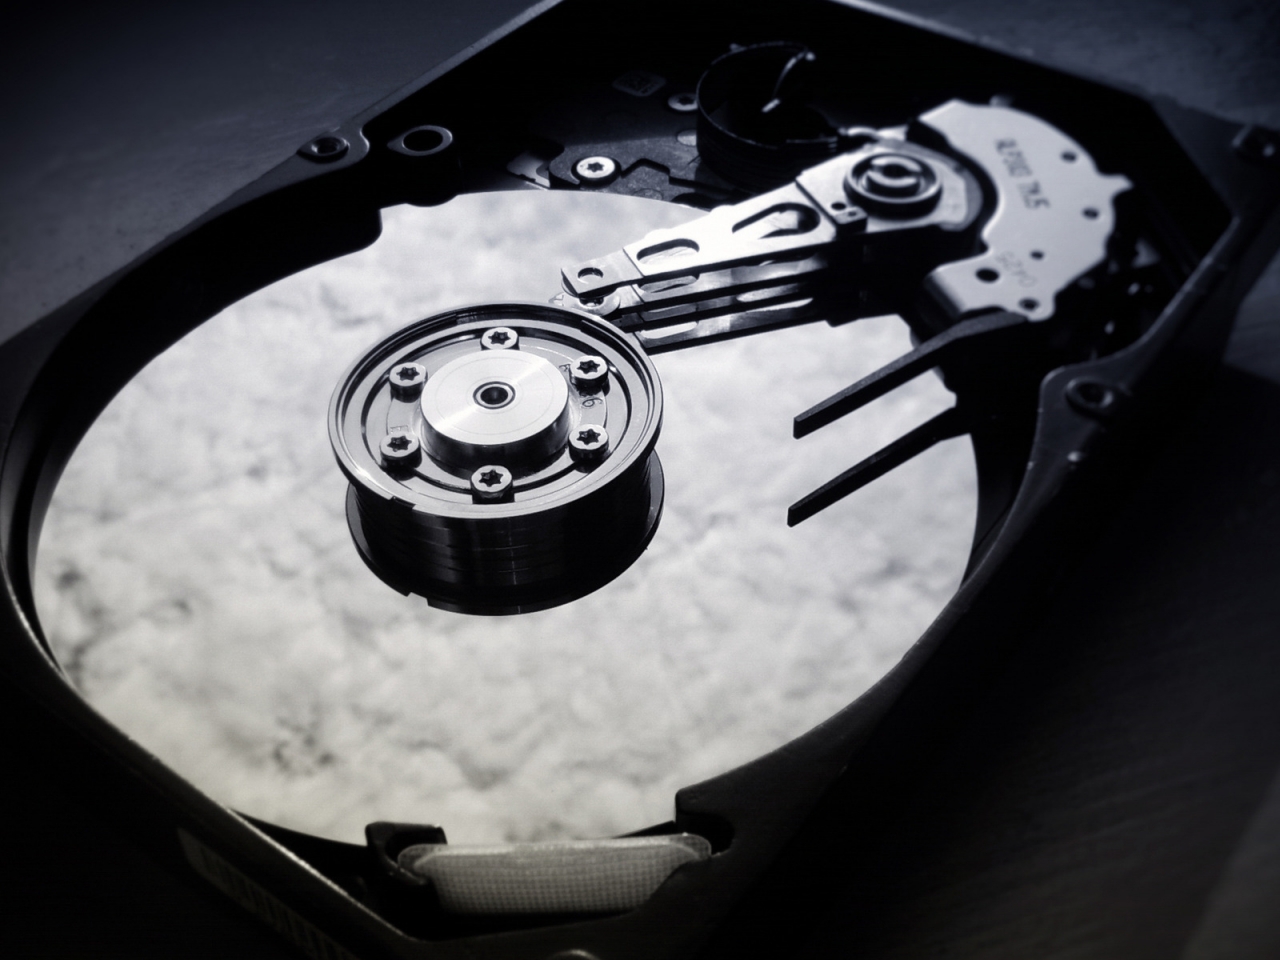 Hard Disk Drive for 1280 x 960 resolution